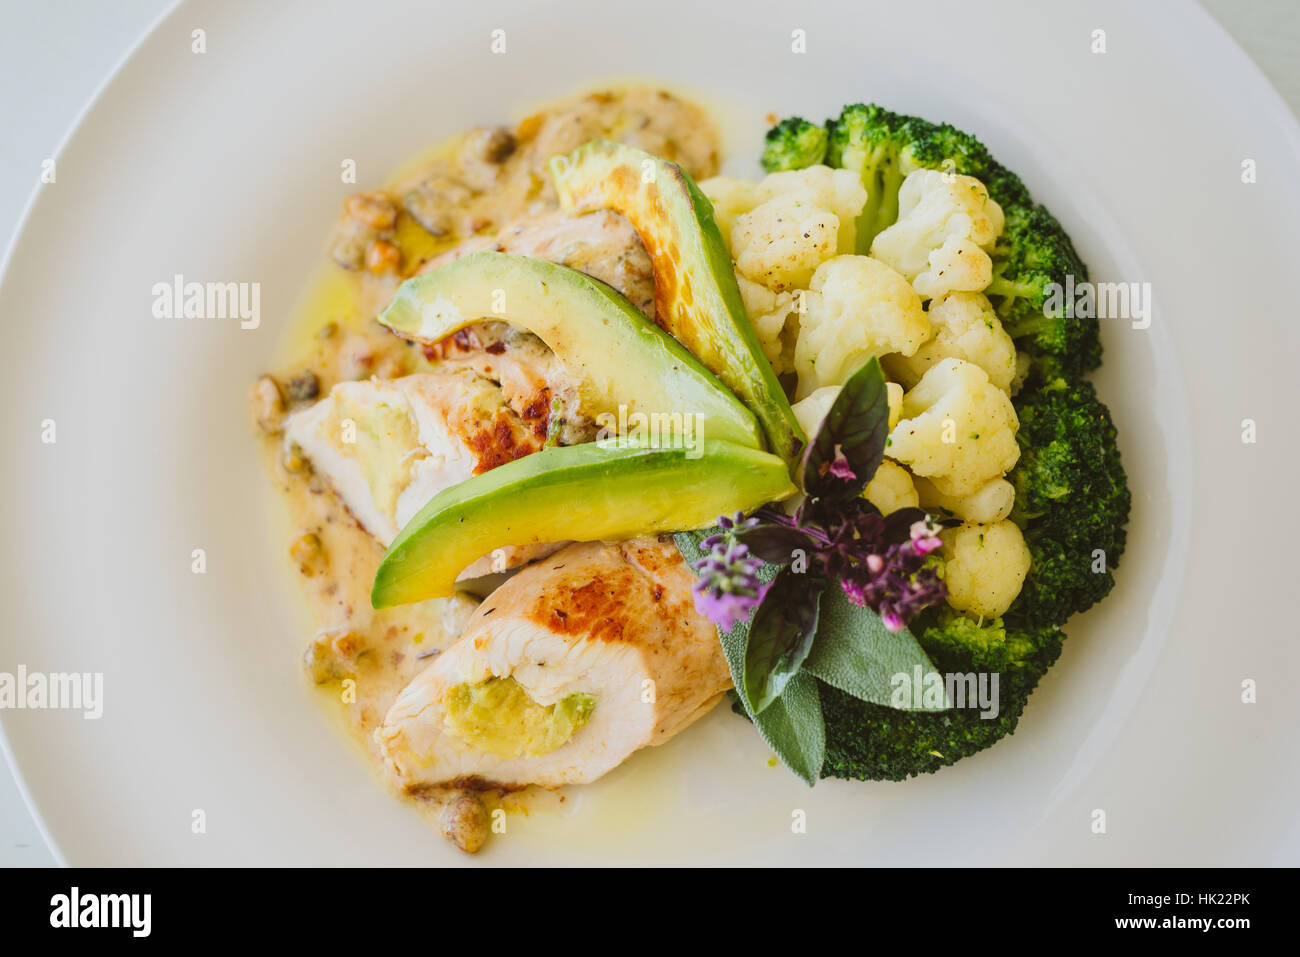 Beautiful and tasty meal on a plate Stock Photo